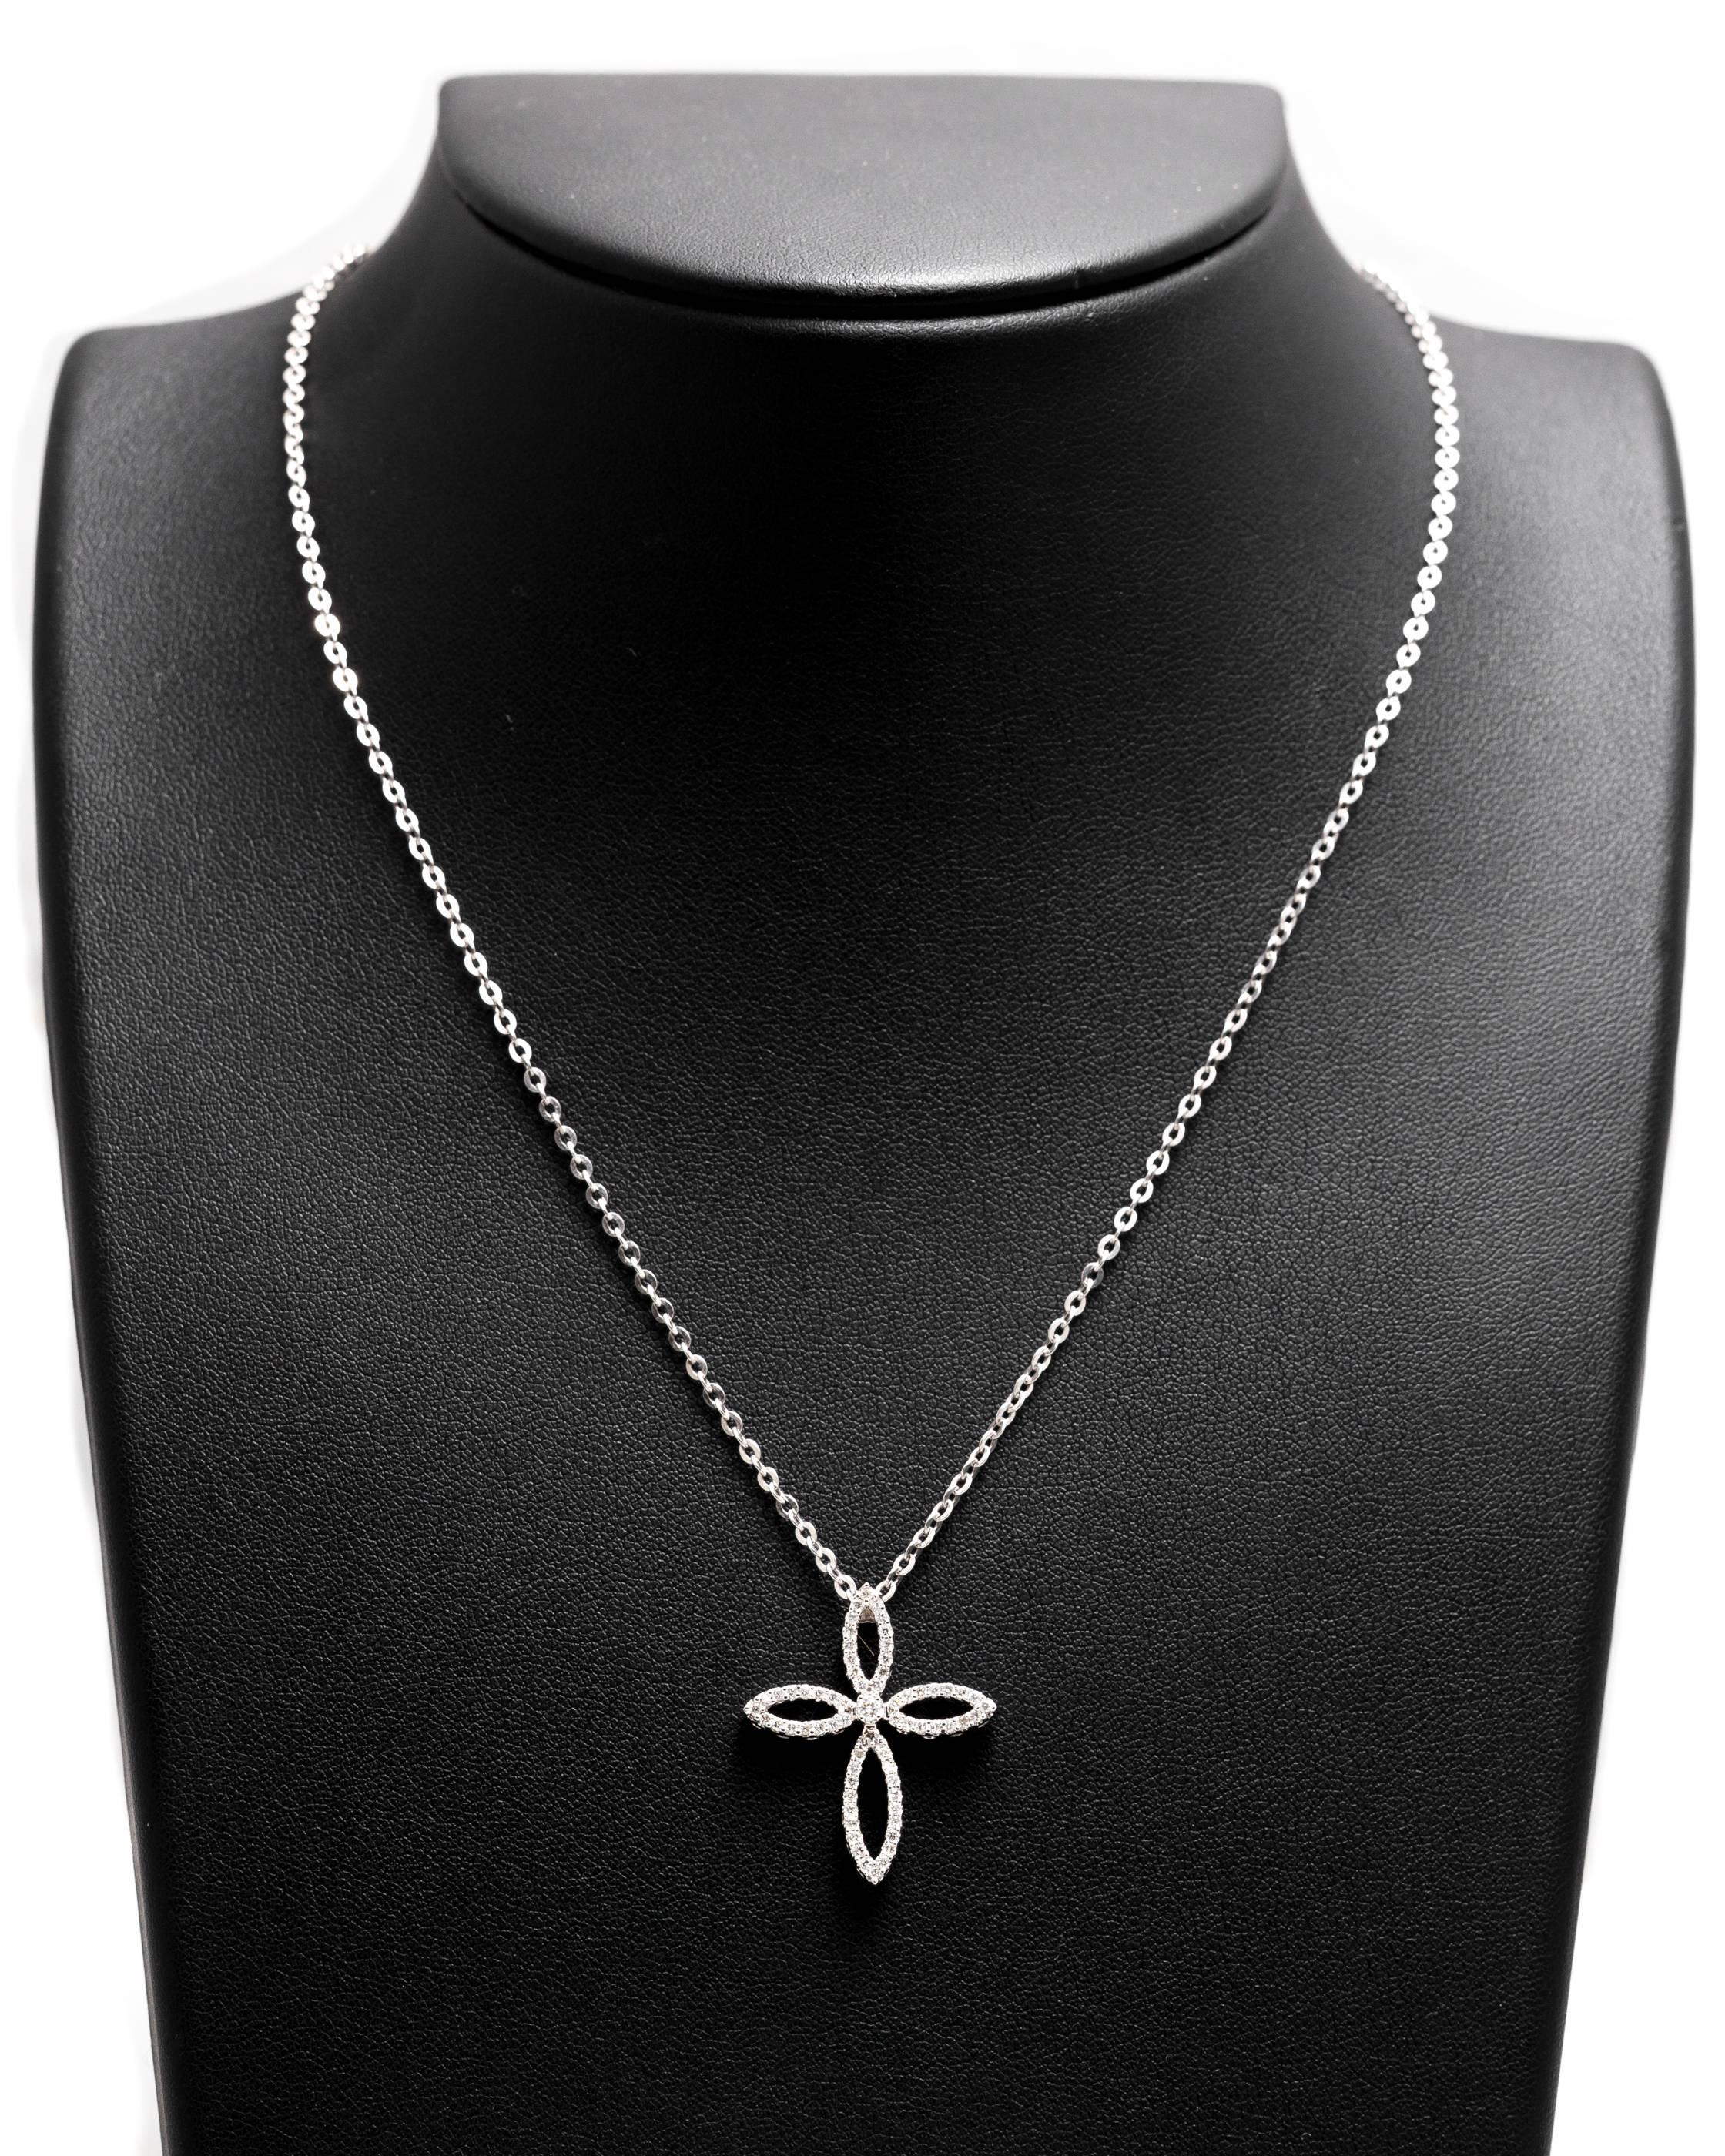 A sparkling pave set diamond cross pendant in 14 karat white gold.  Featuring a total of 67 diamonds weighing a combined 0.36 carats, this diamond features a unique and organic open design.

Grading as VS clarity and G color, the high quality